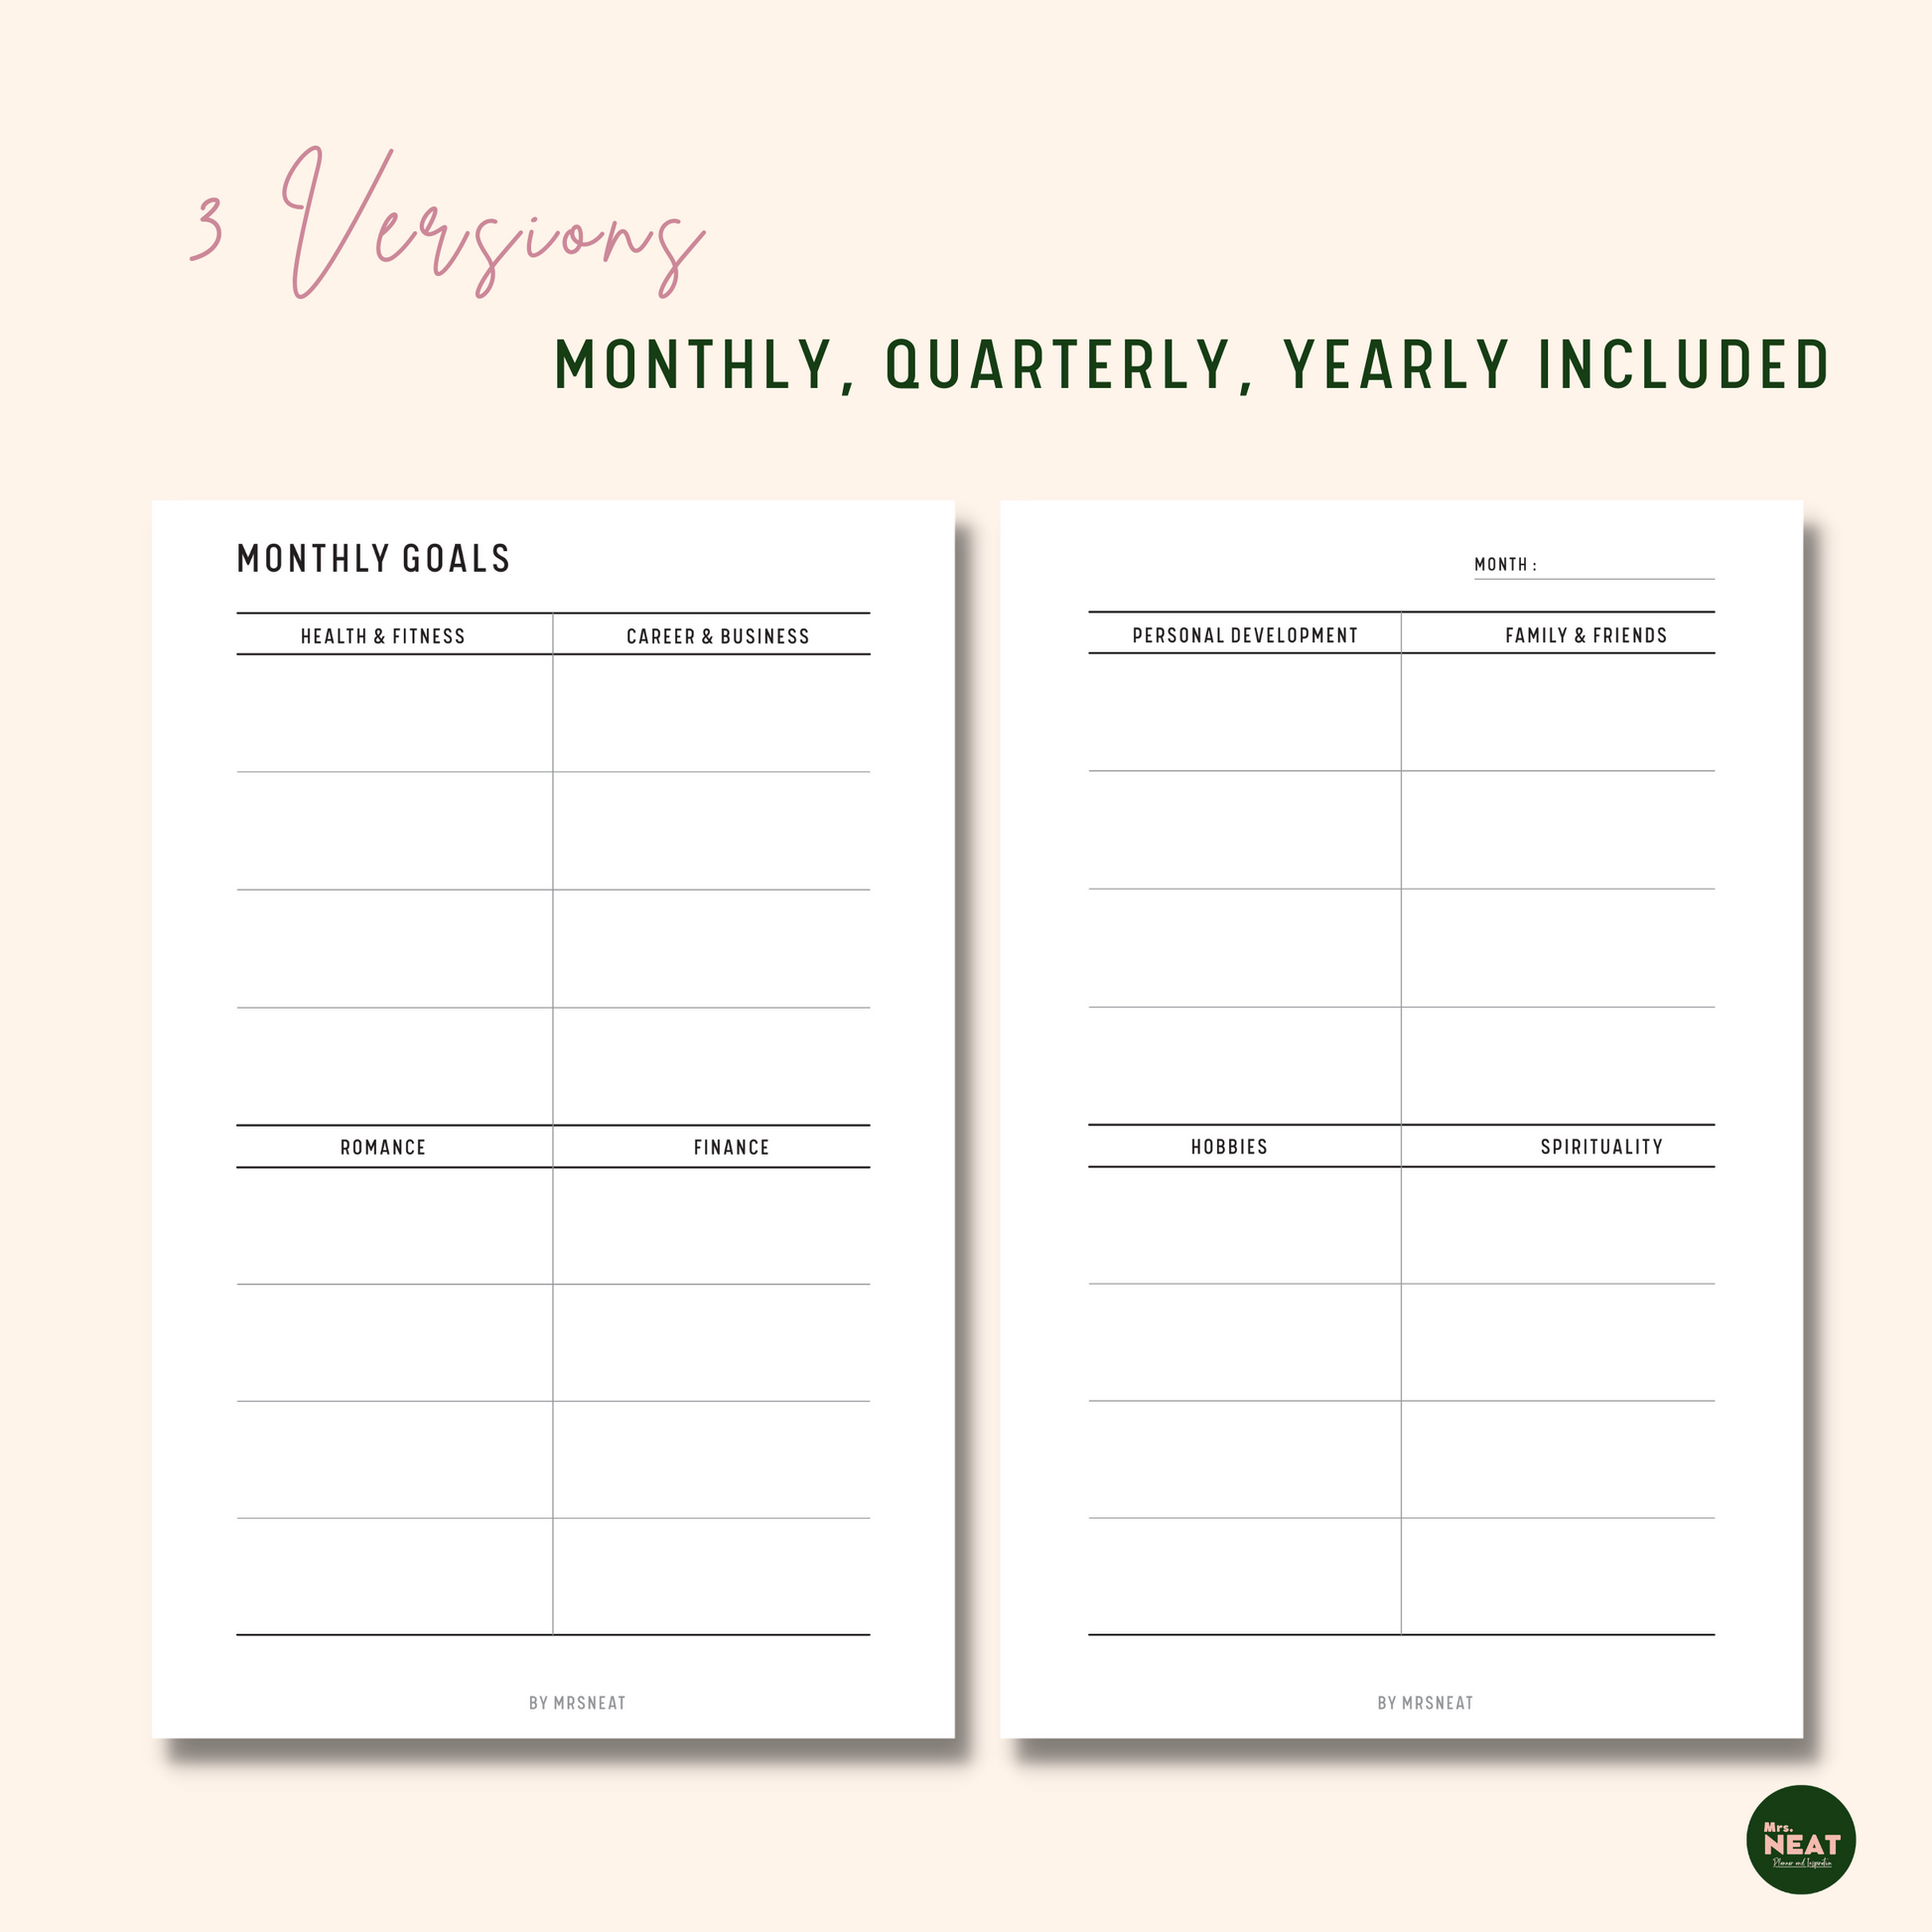 Minimalist 8 Areas of Life Goal Planner Printable for Monthly Goals in 2 pages